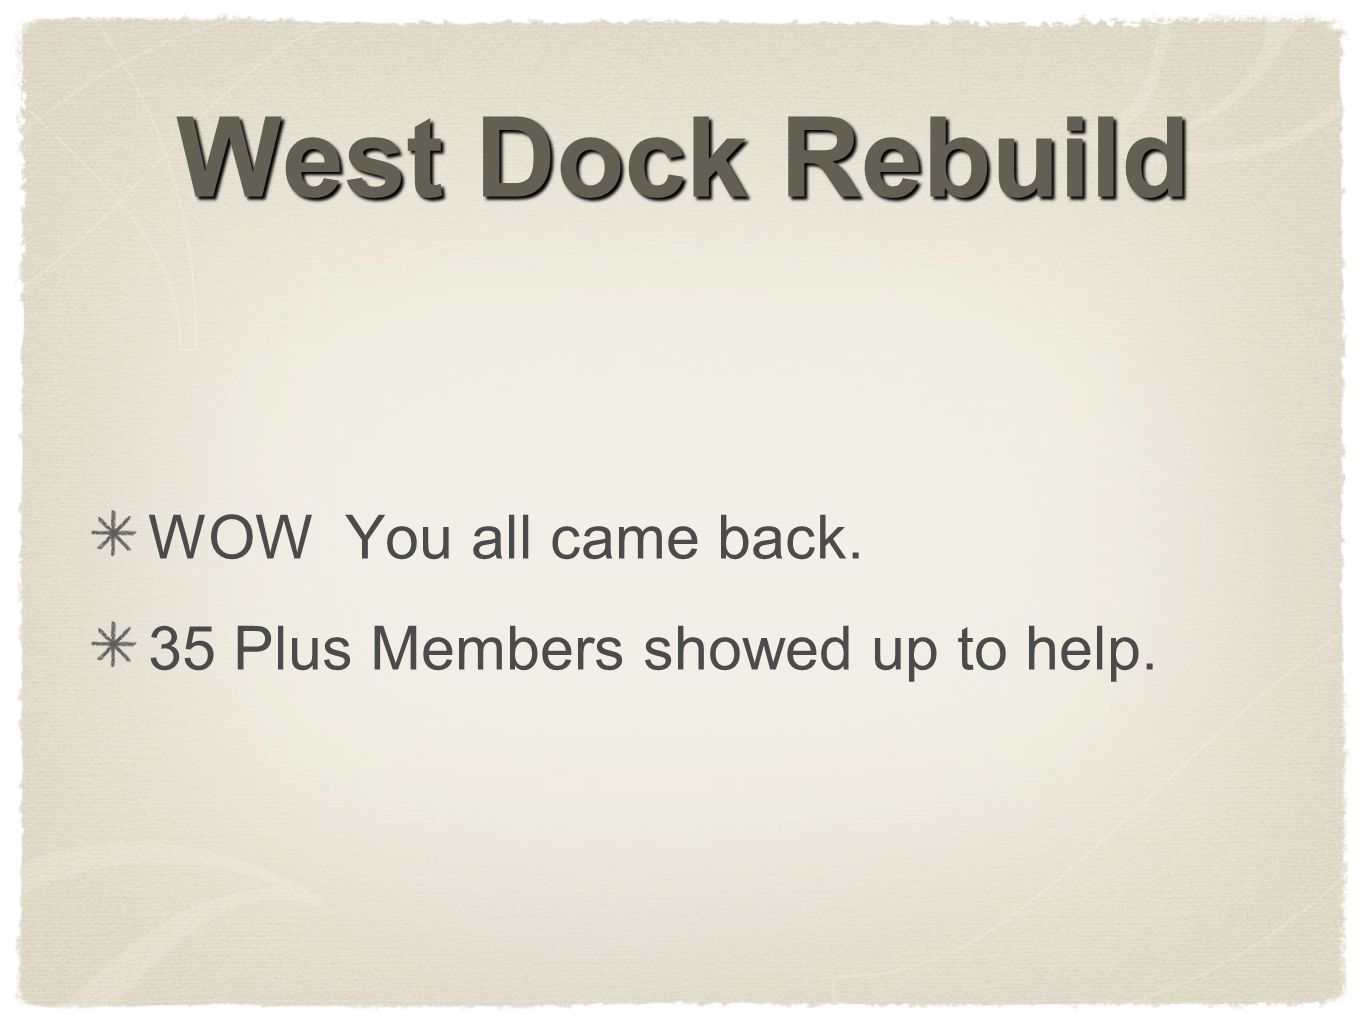 West Dock Rebuild WOW You all came back. 35 Plus Members showed up to help.